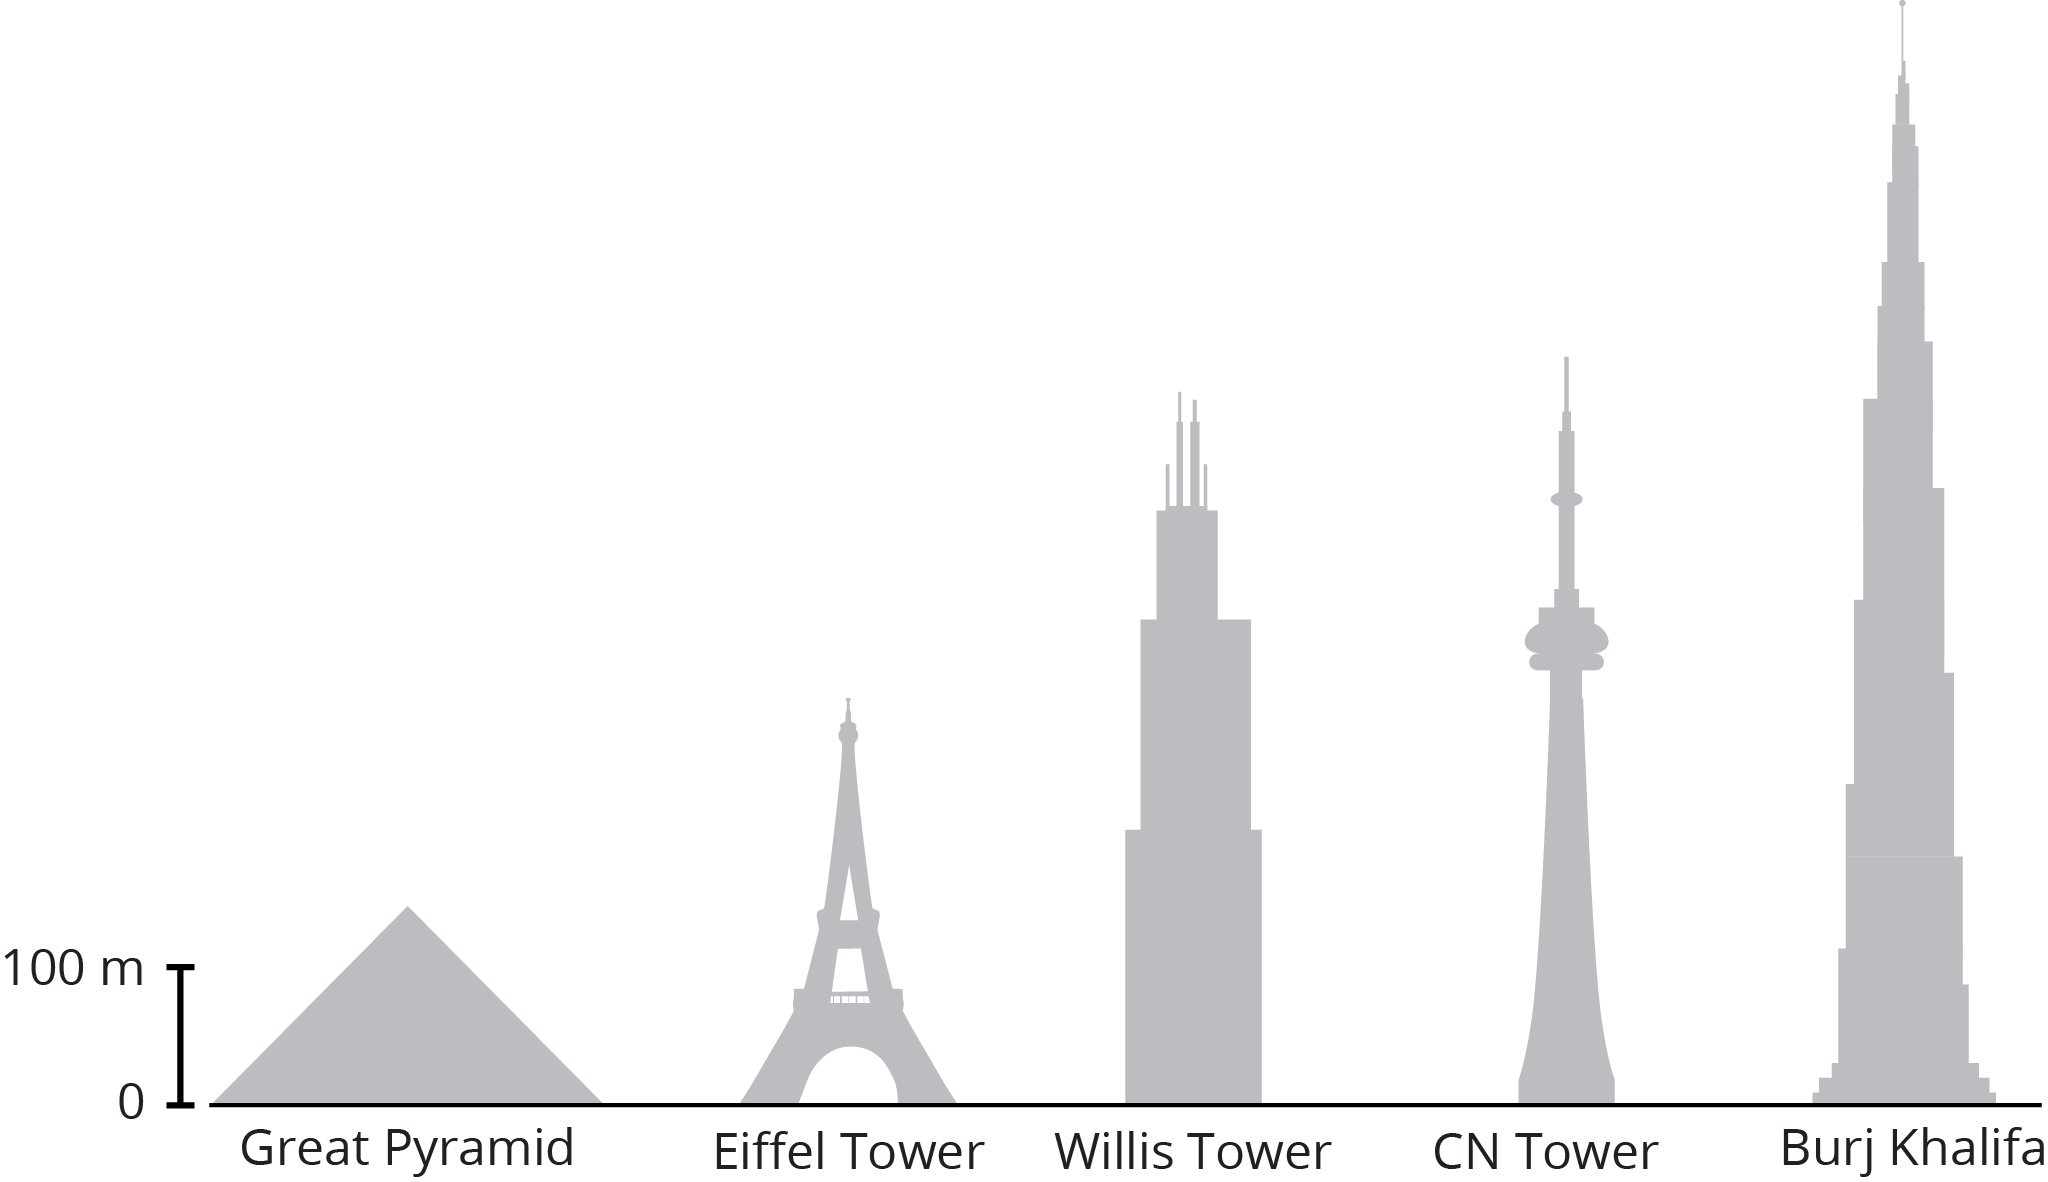 Structures shown from shortest to tallest are, Great Pyramid, Eiffel Tower, Willis Tower, CN Tower, Burj Khalifa.